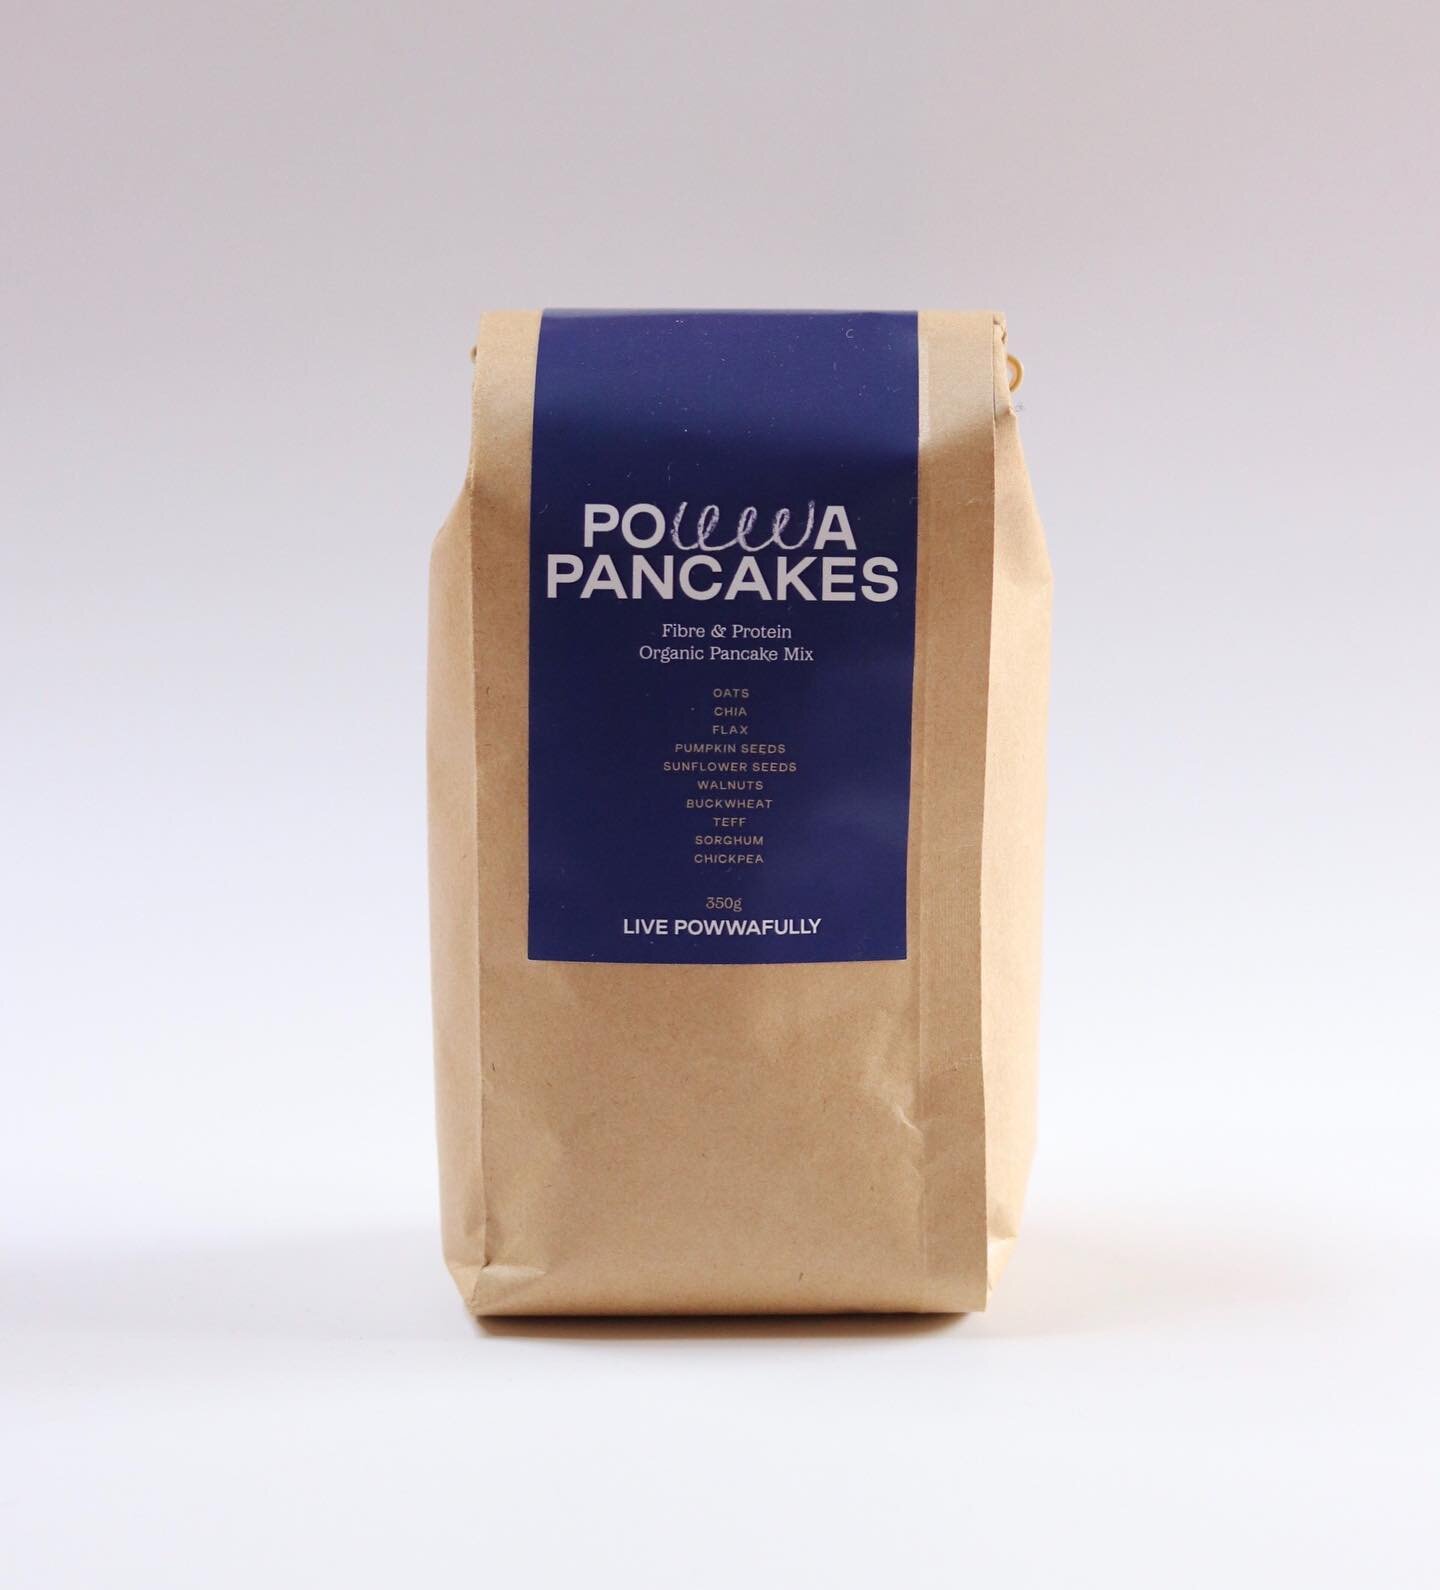 Powwa Pancakes &bull; a Salt Spring product, from my heart to yours. Come for a coffee and pancakes this Sunday at Switchboard 10-1! 

@switchboard_cafe #saltspringisland